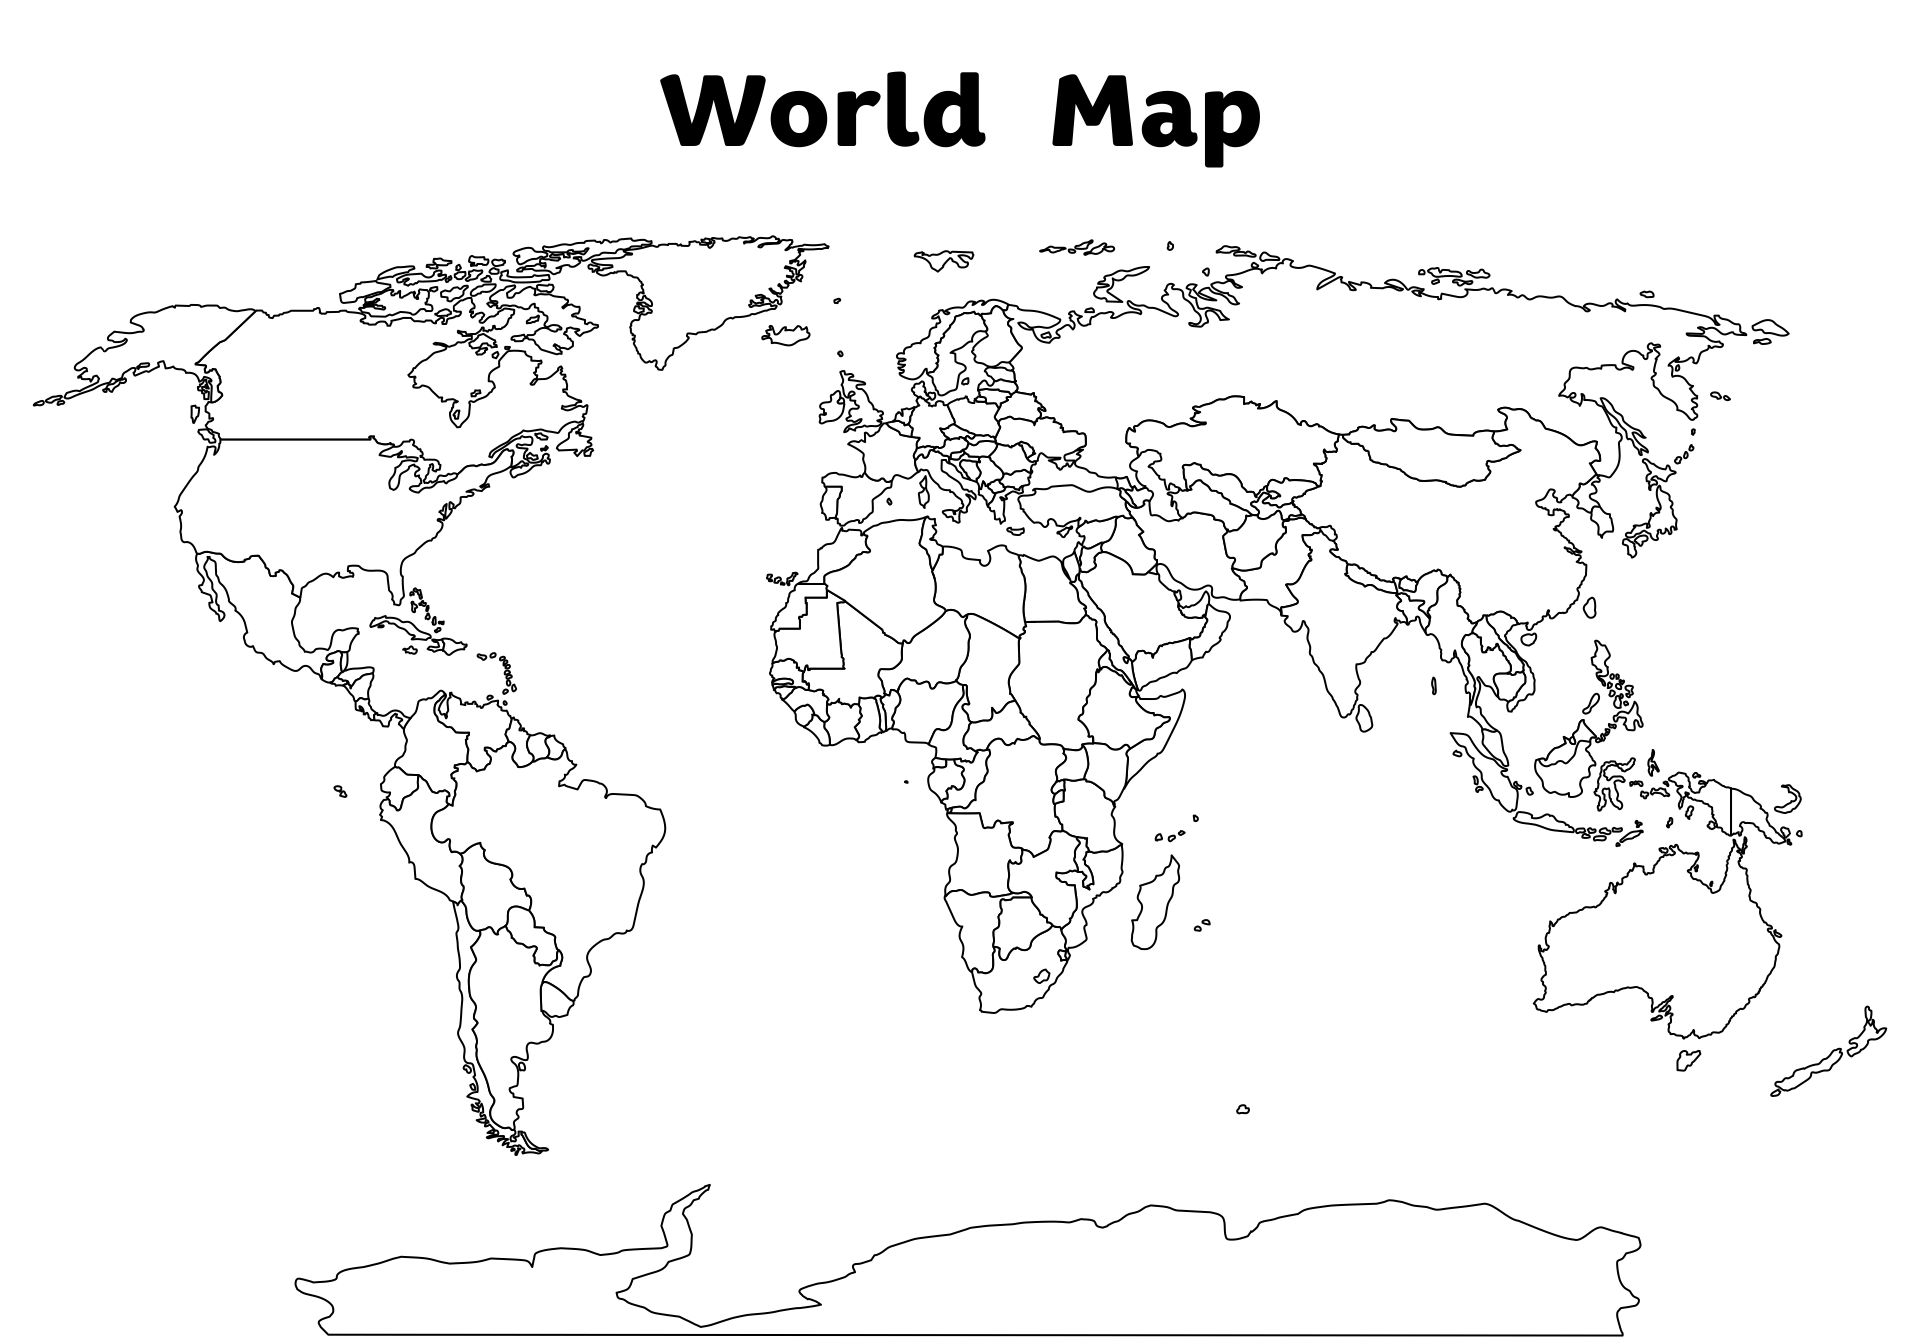 World Map with Countries without Labels